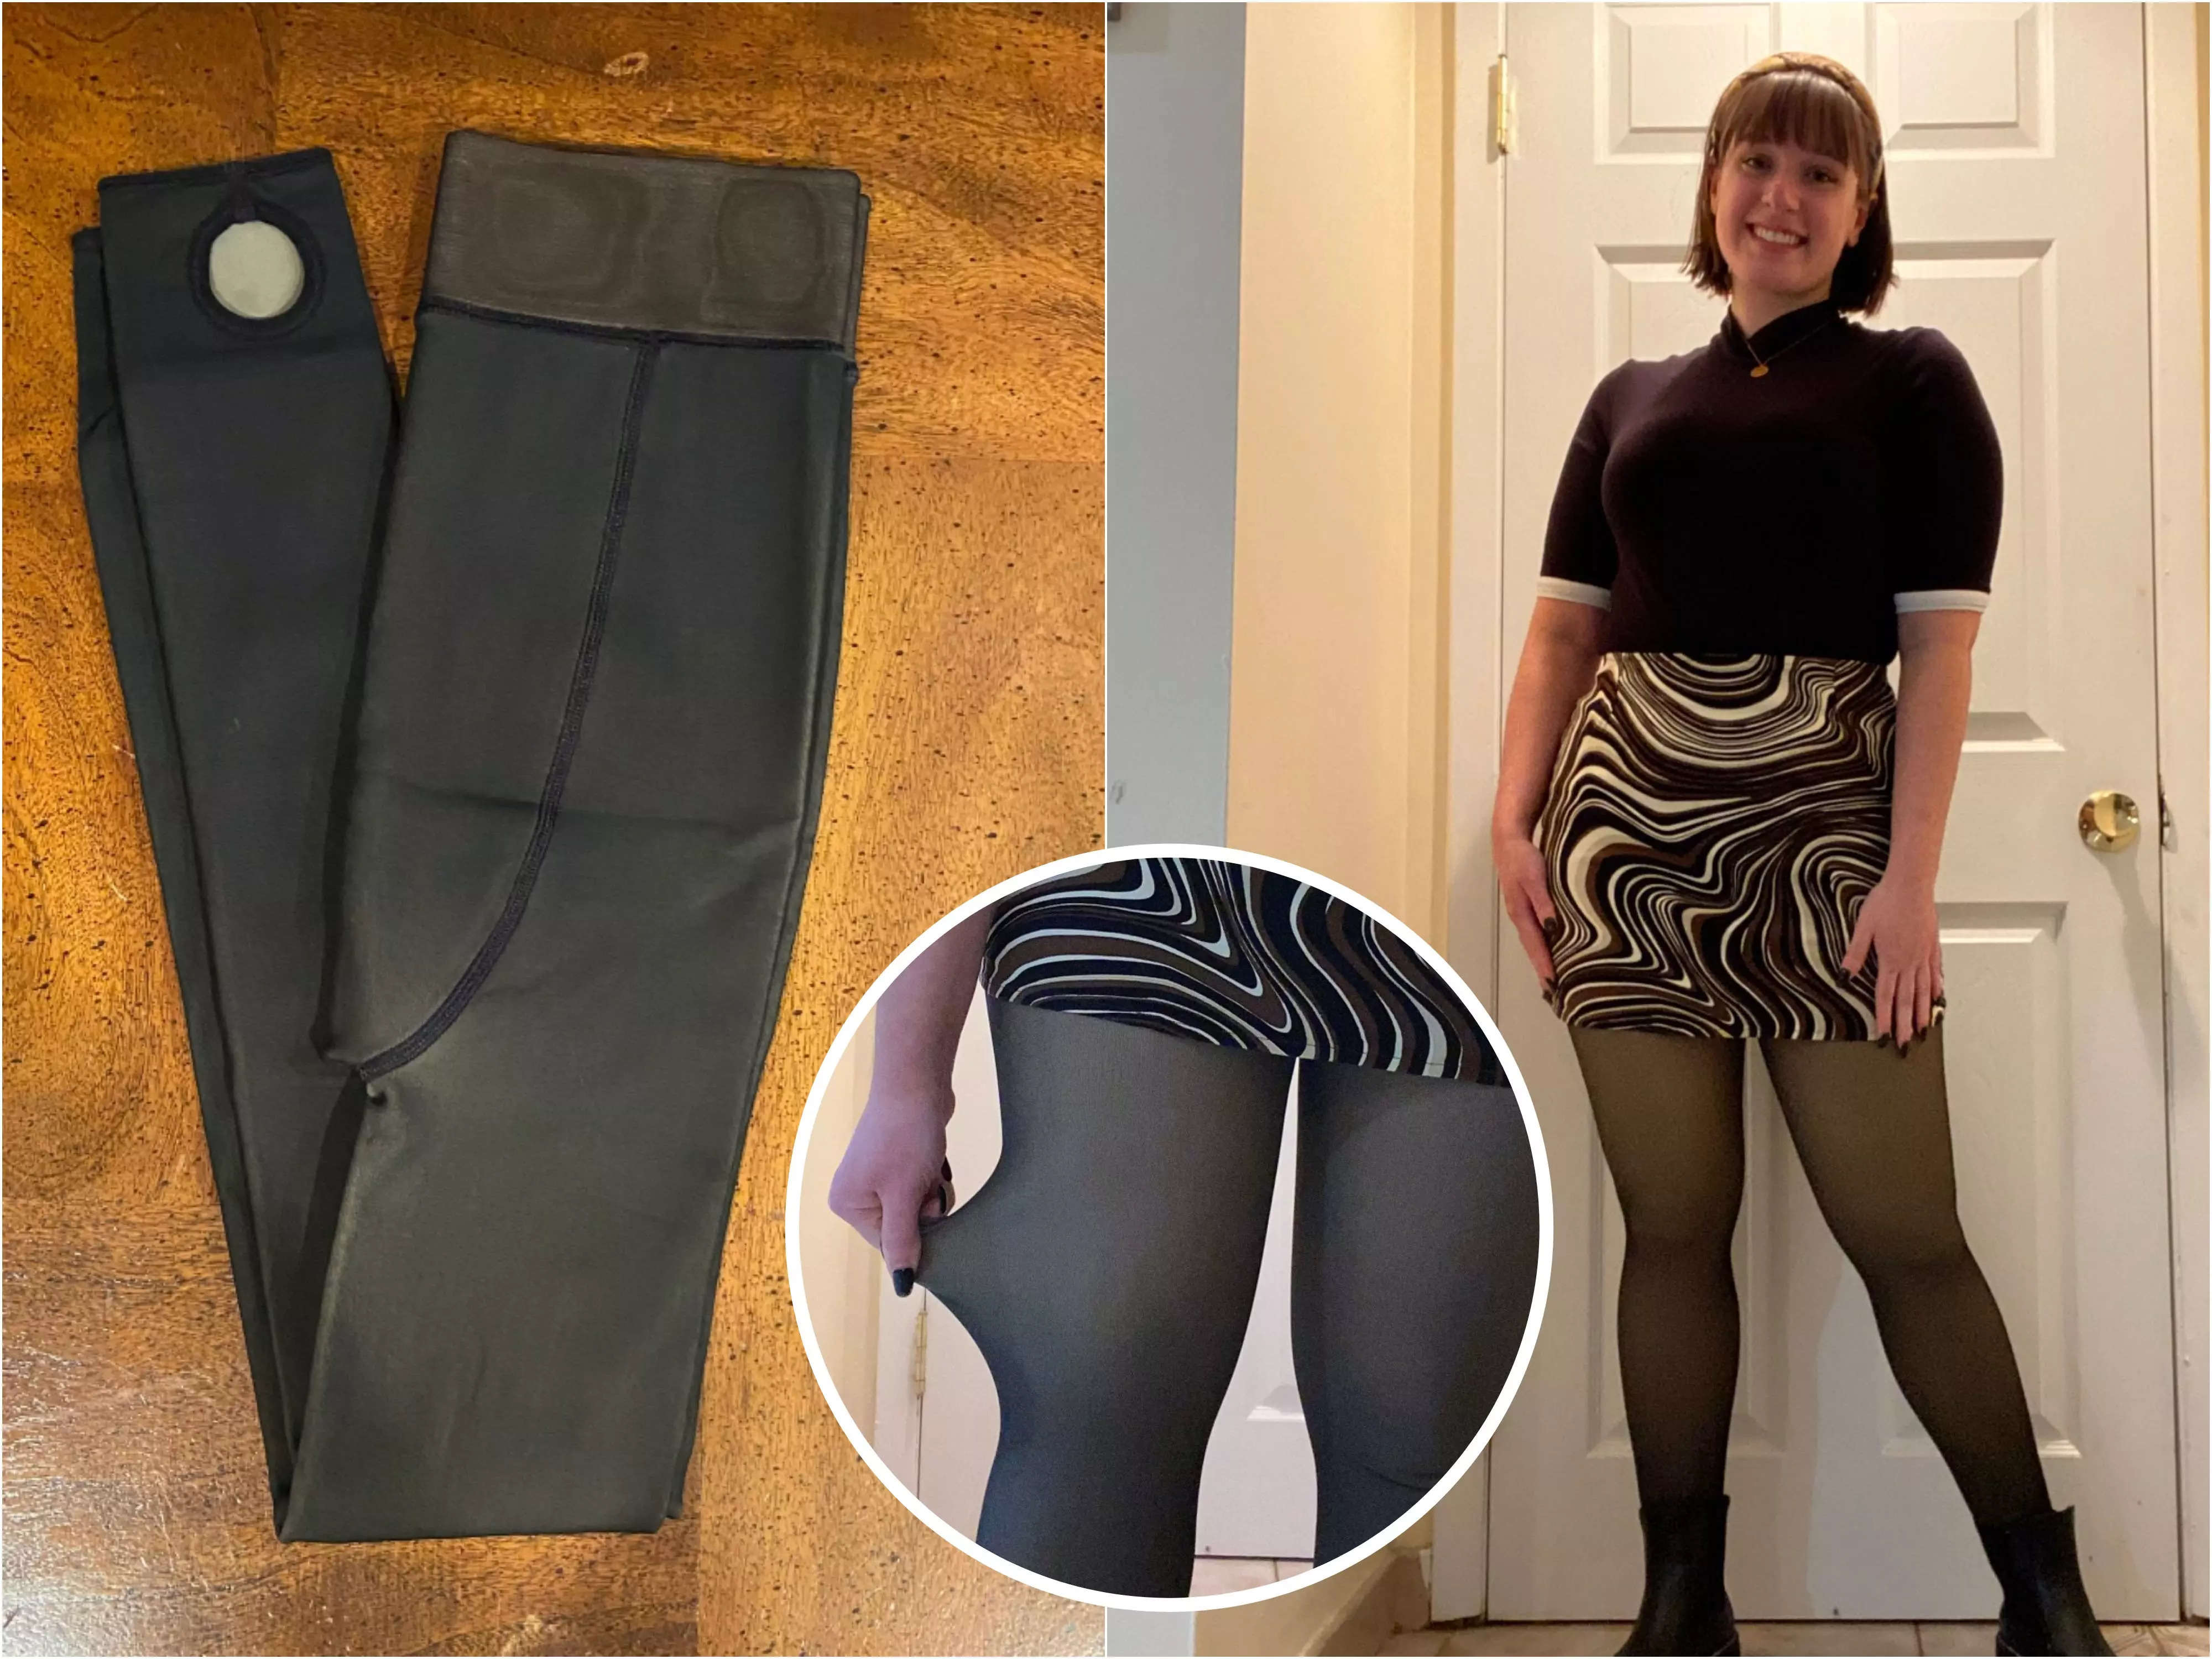 
I tried the fleece-lined 'sheer' tights that TikTokers love, and while they're practical, there needs to be more inclusive options
